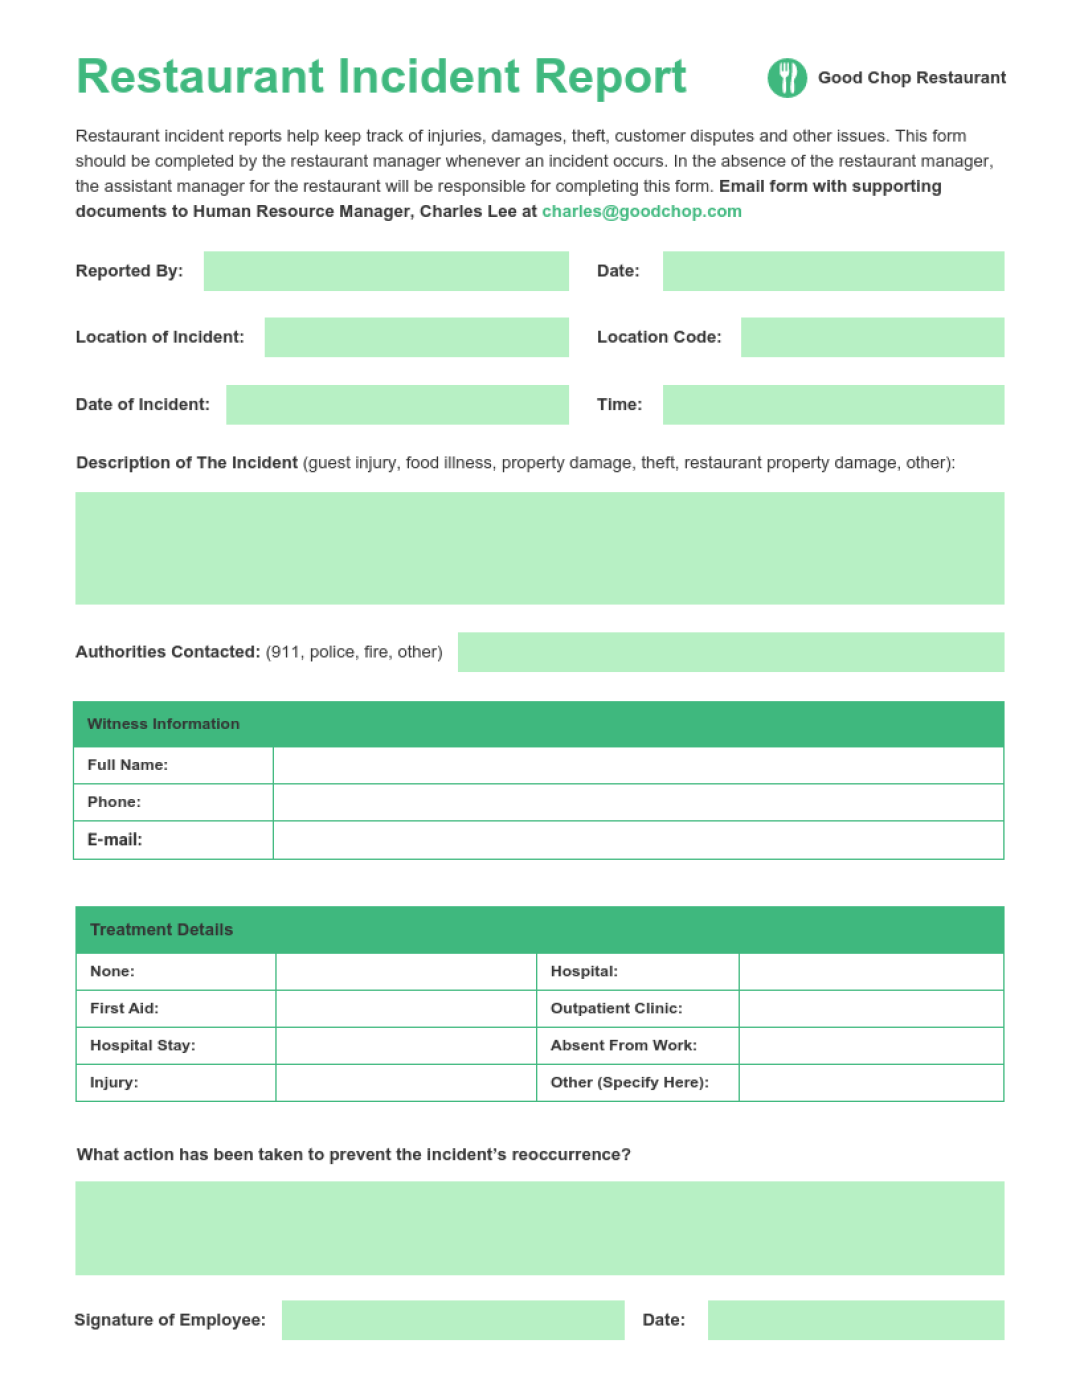 Picture of: Restaurant Incident Report Template